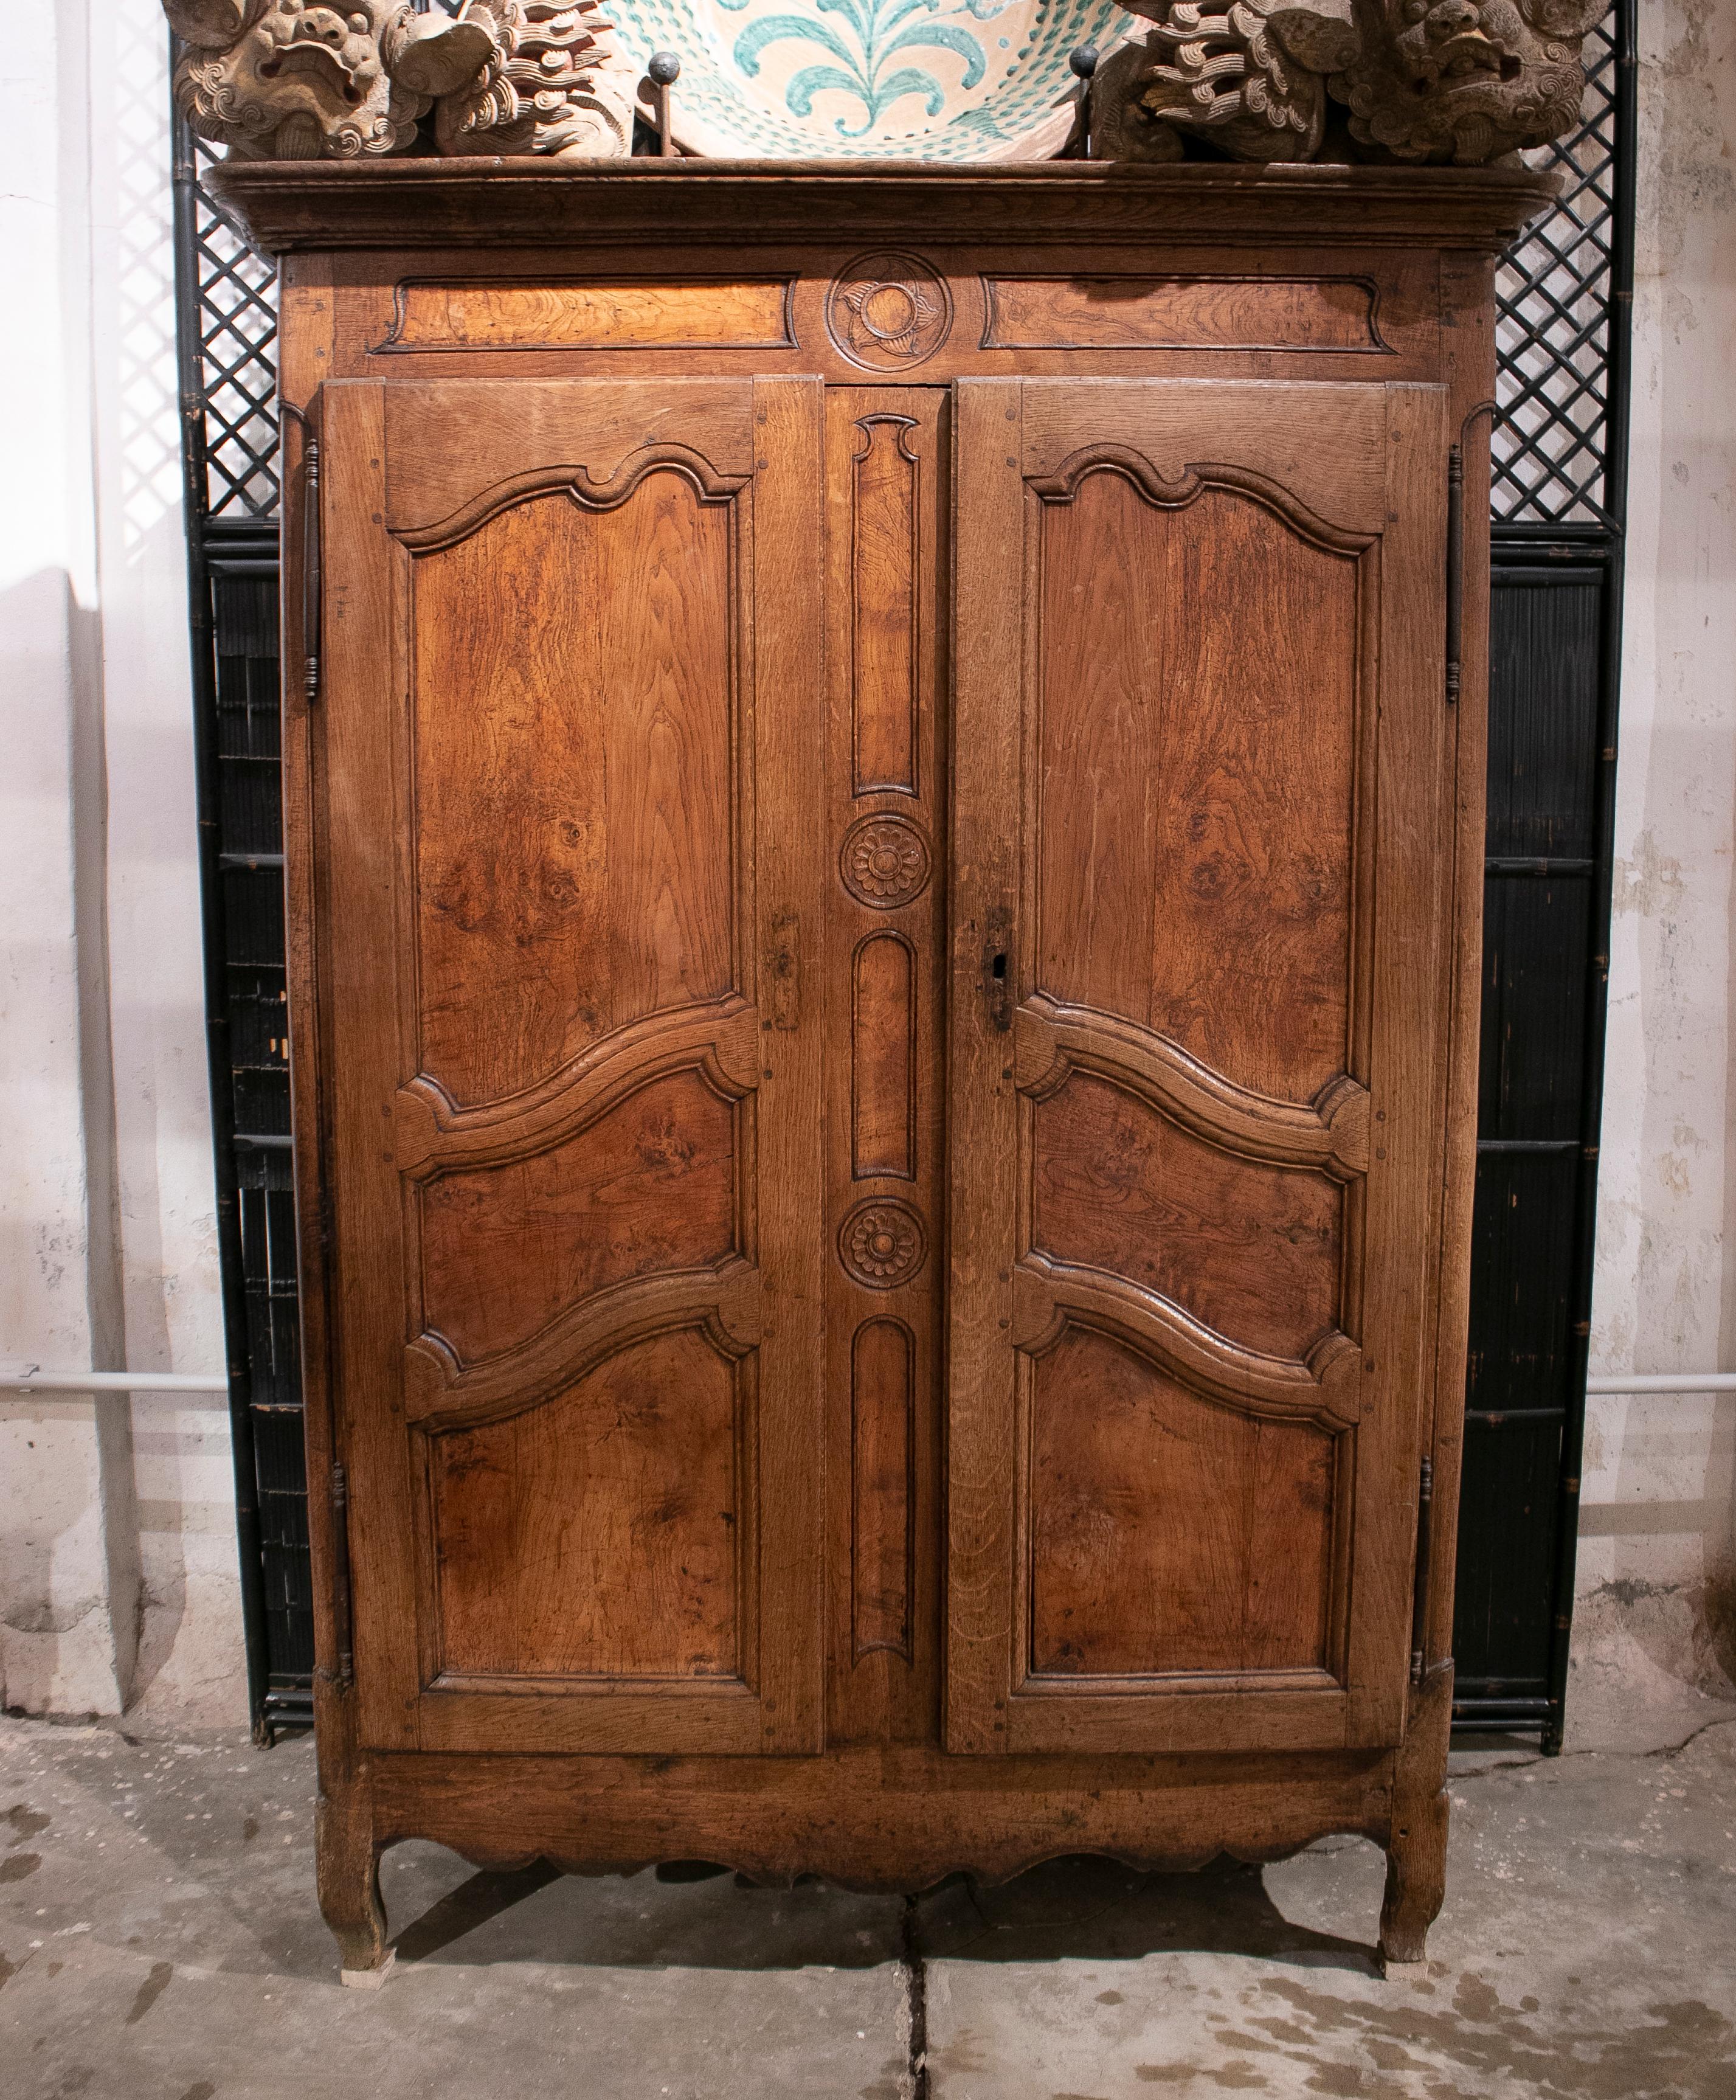 Antique 18th century French two door oak panelled wardrobe.